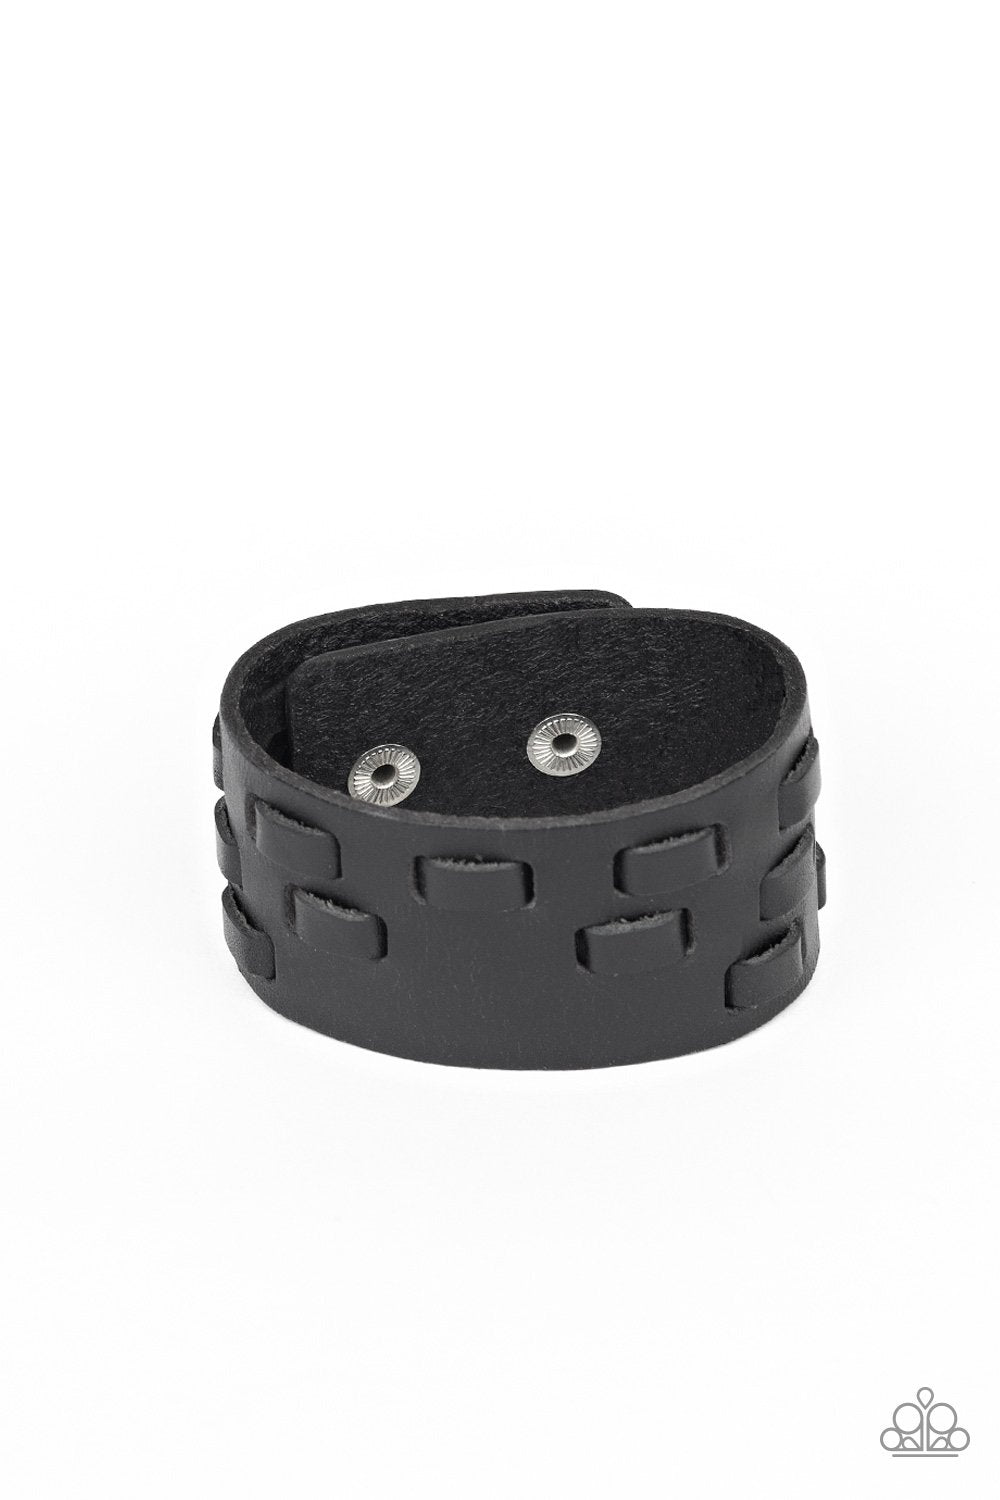 Rodeo Rampage Men's Black Leather Wrap Snap Bracelet - Paparazzi Accessories-CarasShop.com - $5 Jewelry by Cara Jewels